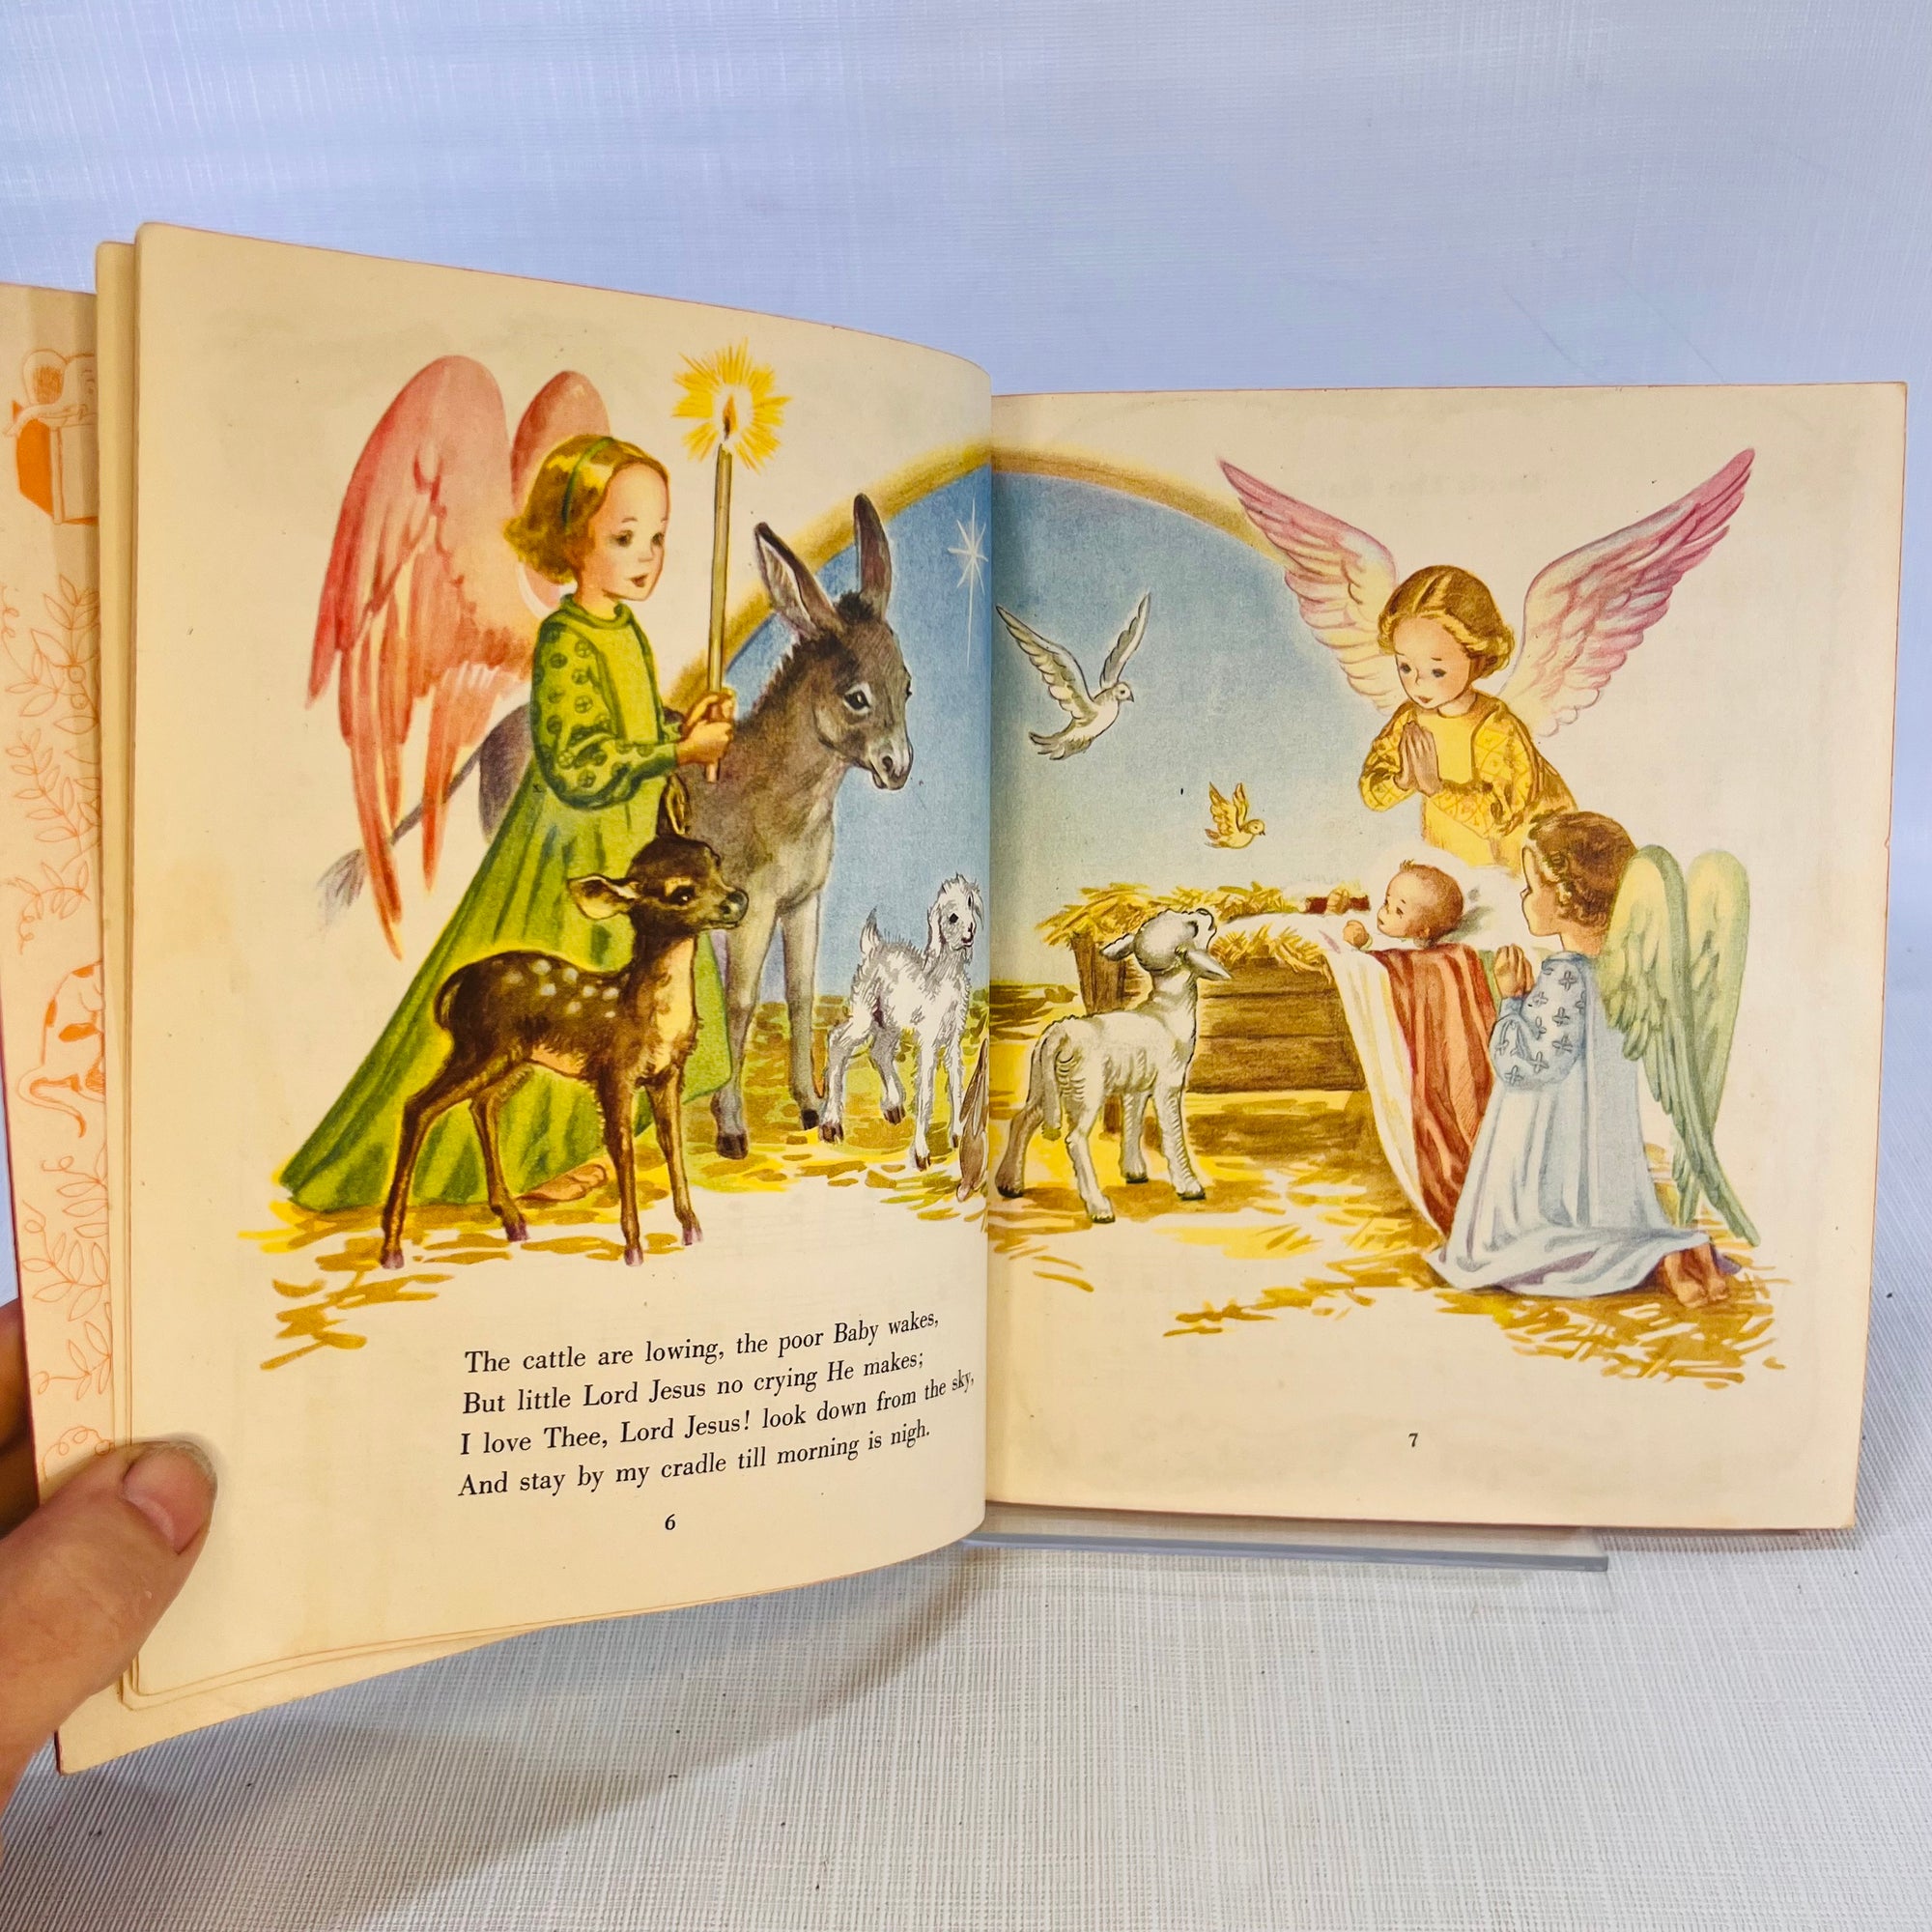 Christmas Carols arranged by Marjorie Wyckloff pictures by Corinne Malvern 1946 Simon and Schuster A Little Golden Book